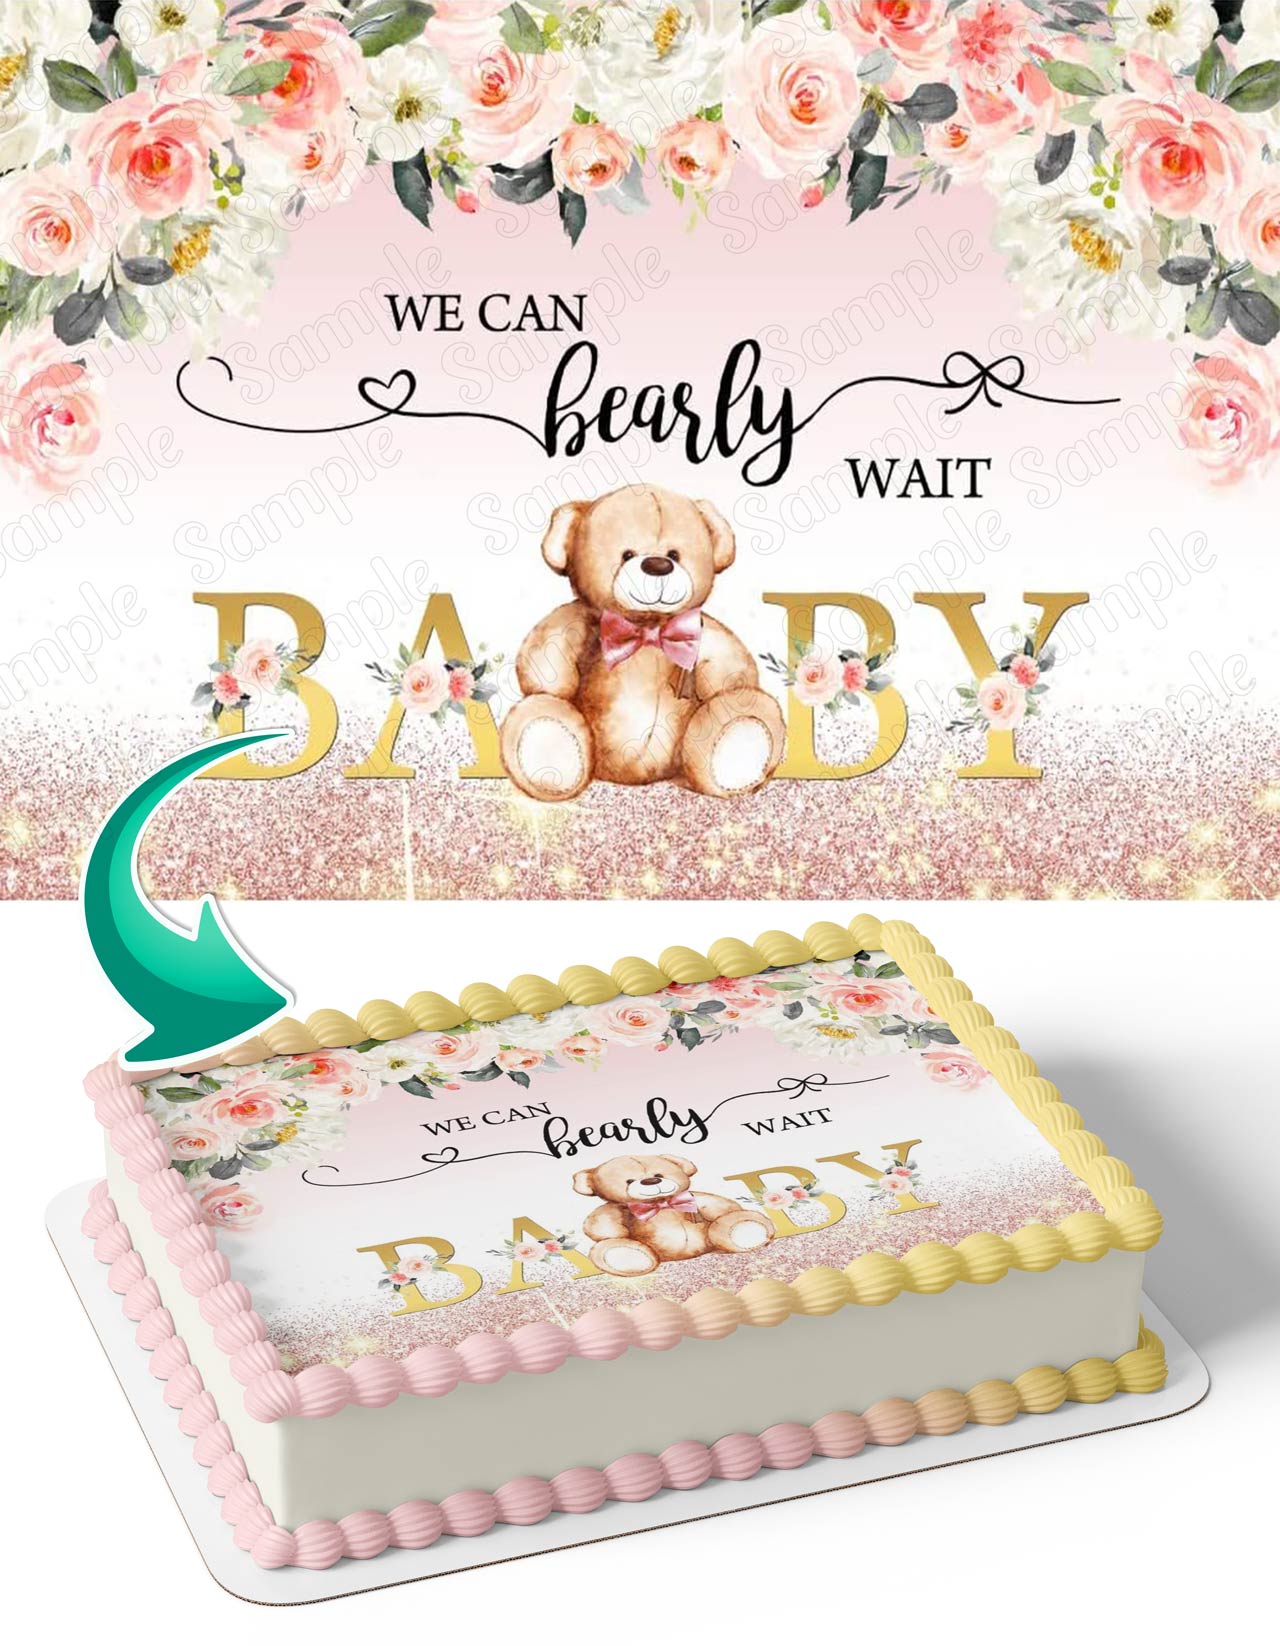 Amazoncom We Can Bearly Wait Cake Topper Bear Baby Shower Decorations  Supplies for Boys Girls Teddy Theme Gender Reveal Party Dessert Ornaments  Sign Doublesided Gold Glitter  Grocery  Gourmet Food